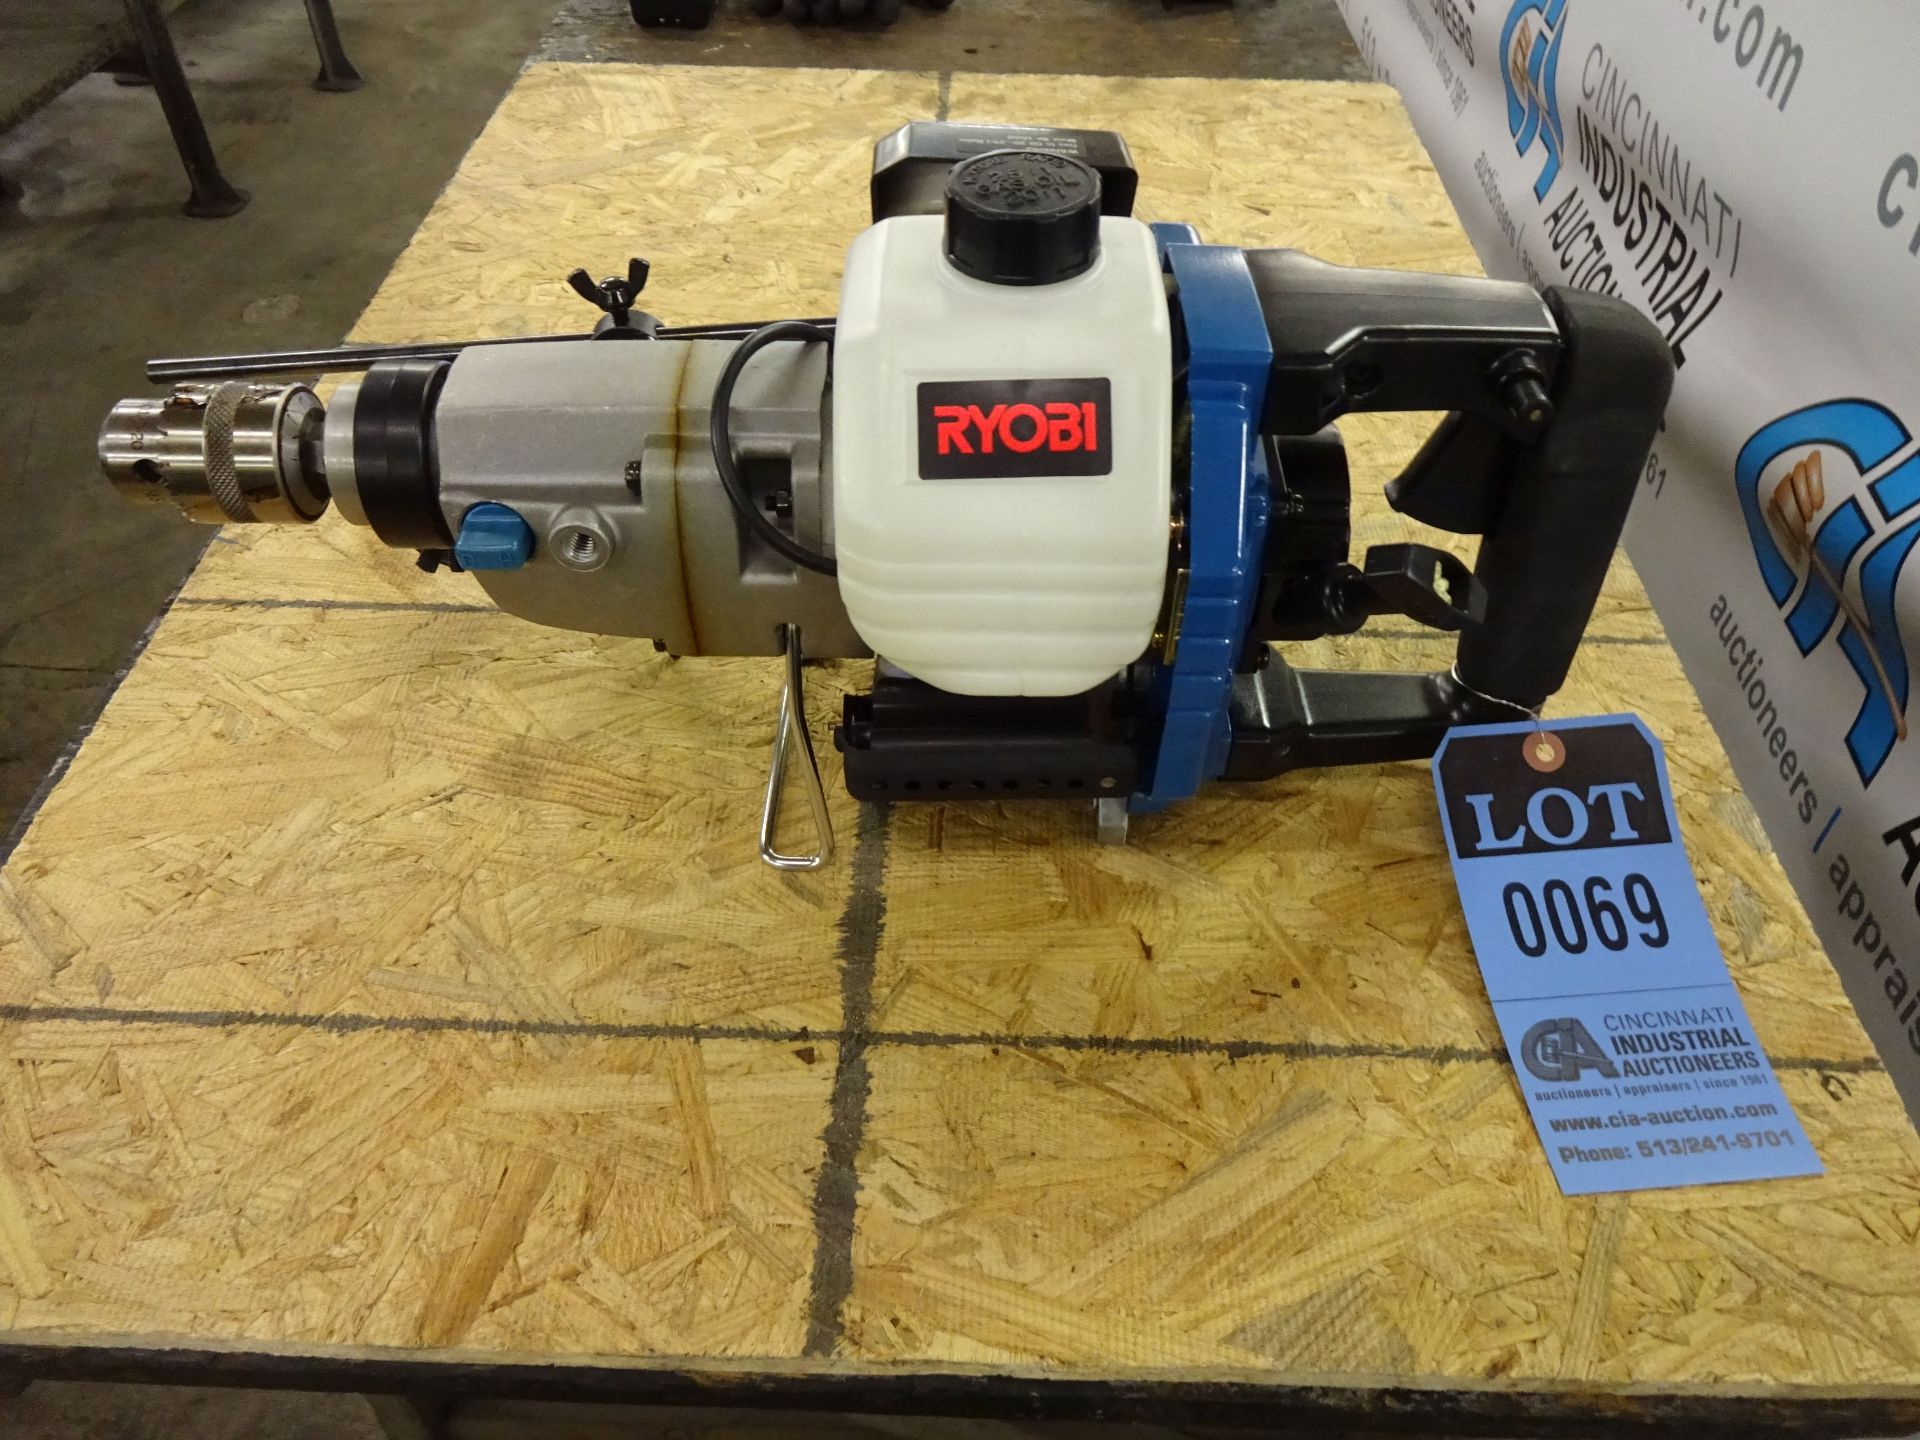 1/2" RYOBI MODEL EH-1930 TWO-CYCLE GAS HAMMER DRILL (BRAND NEW)